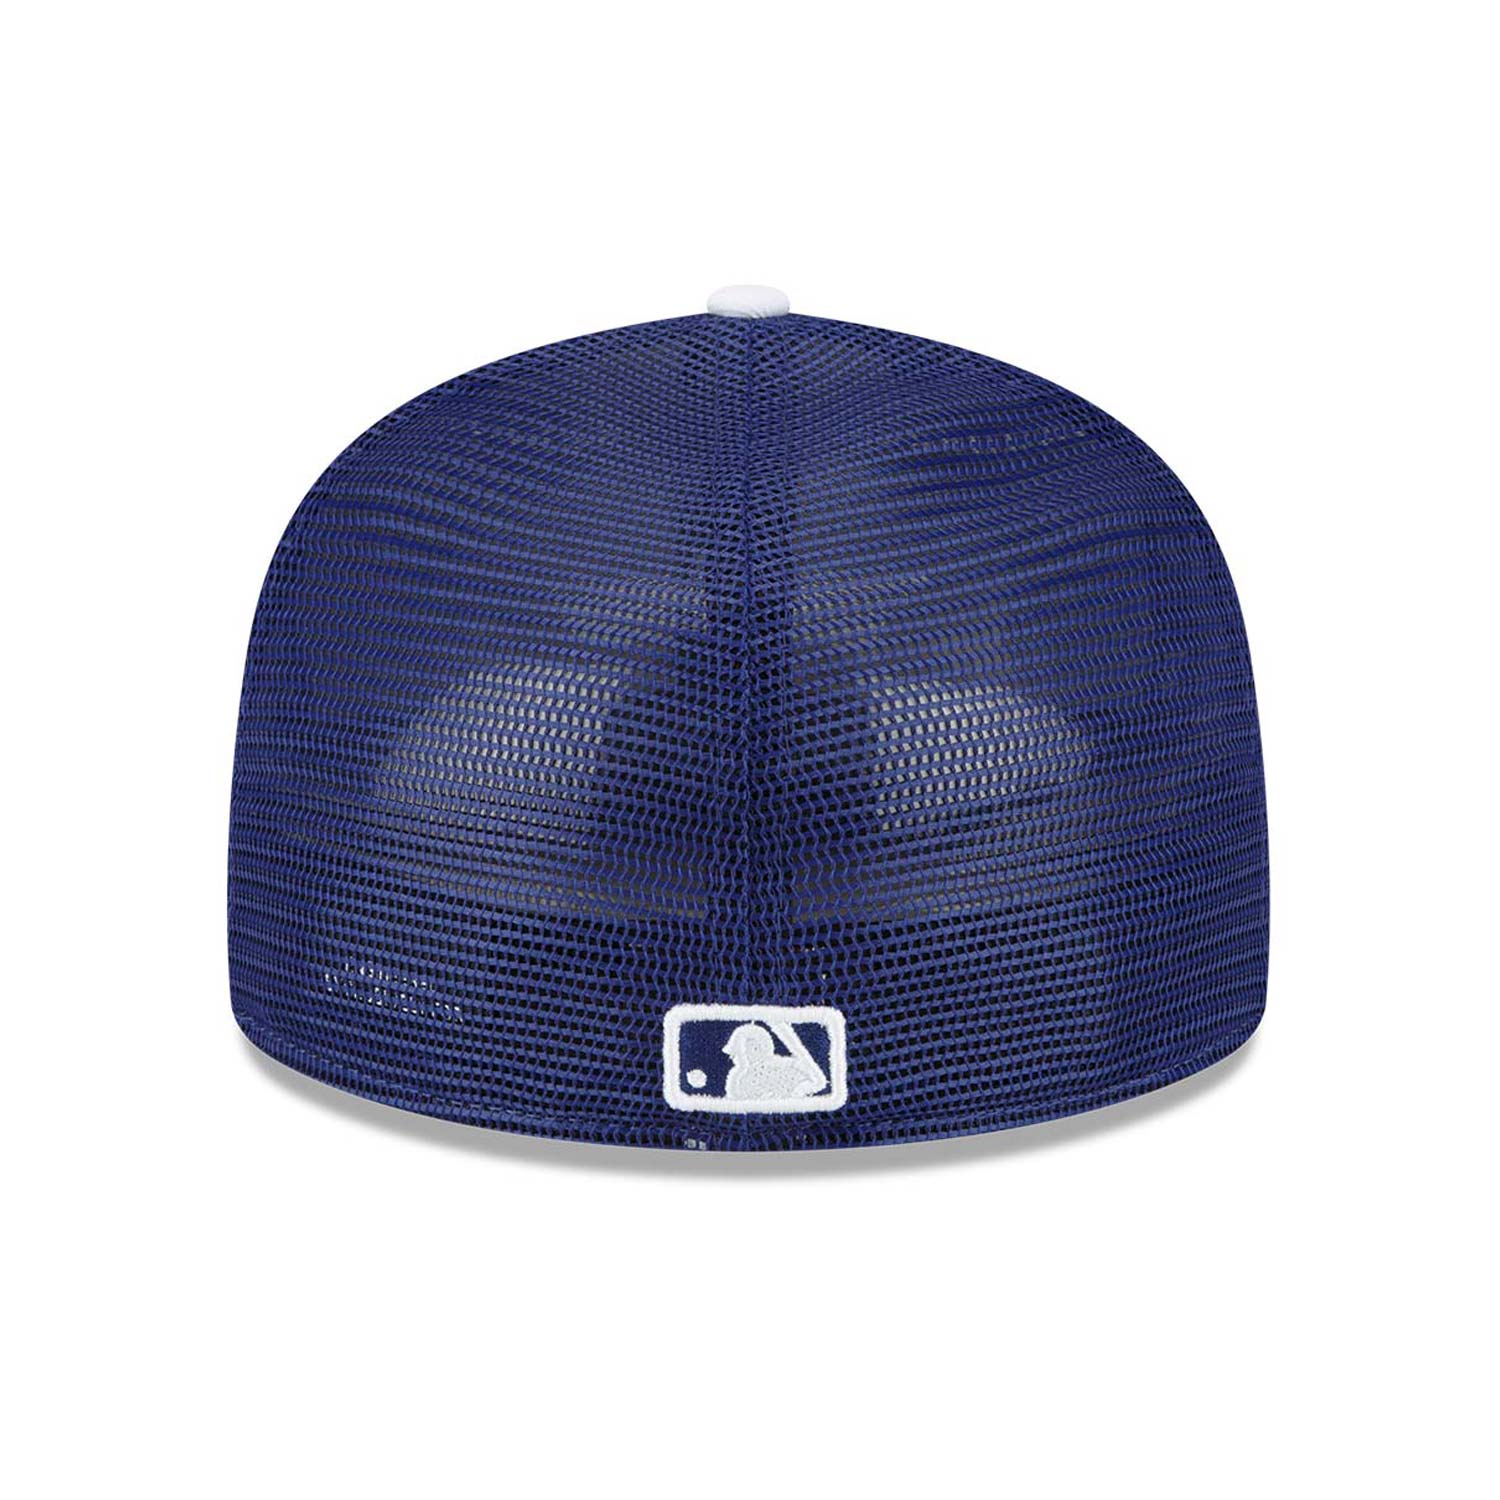 LA Dodgers MLB Spring Training Blue 59FIFTY Fitted Cap